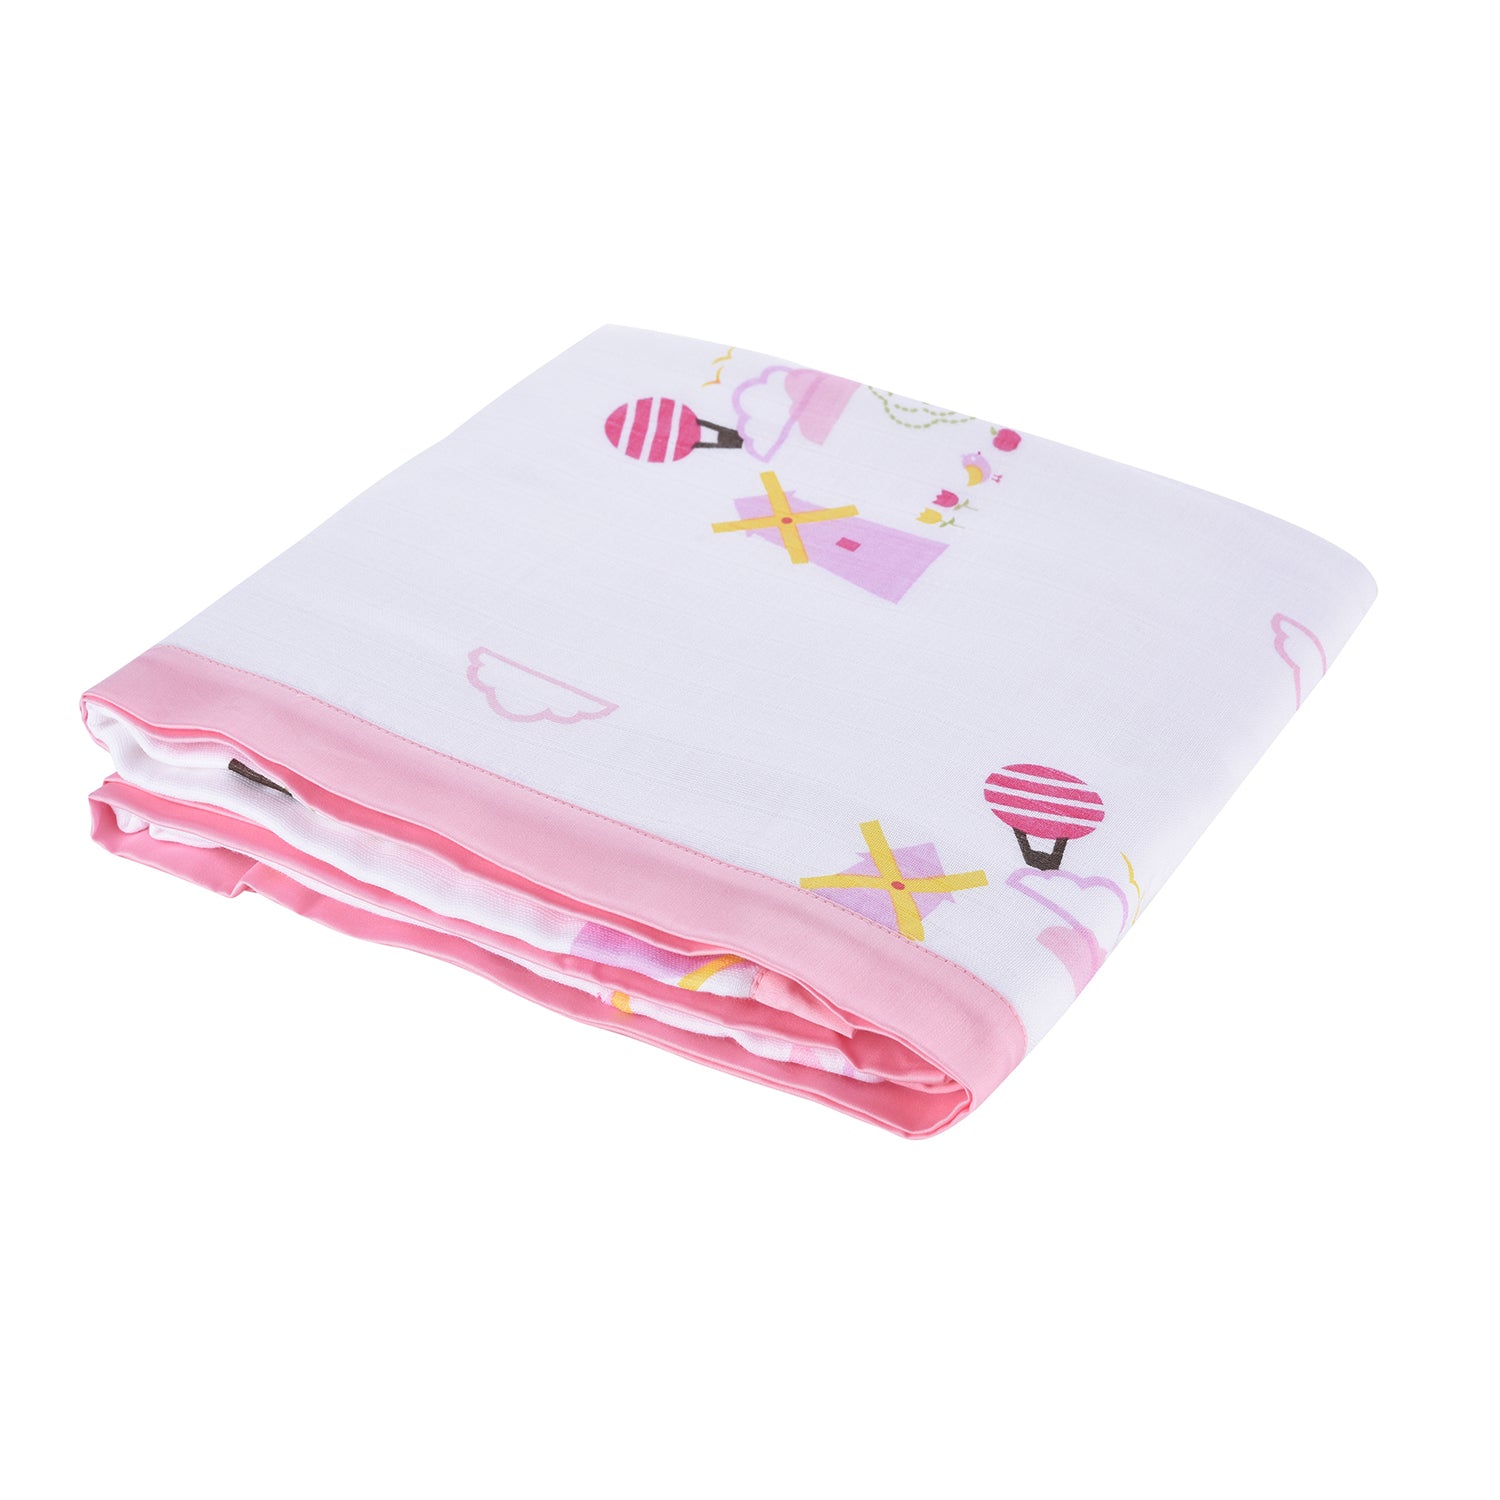 My Milestones 100% Cotton Muslin Baby Blanket - 6 Layered (43x43 inches) - Dutch Country Pink